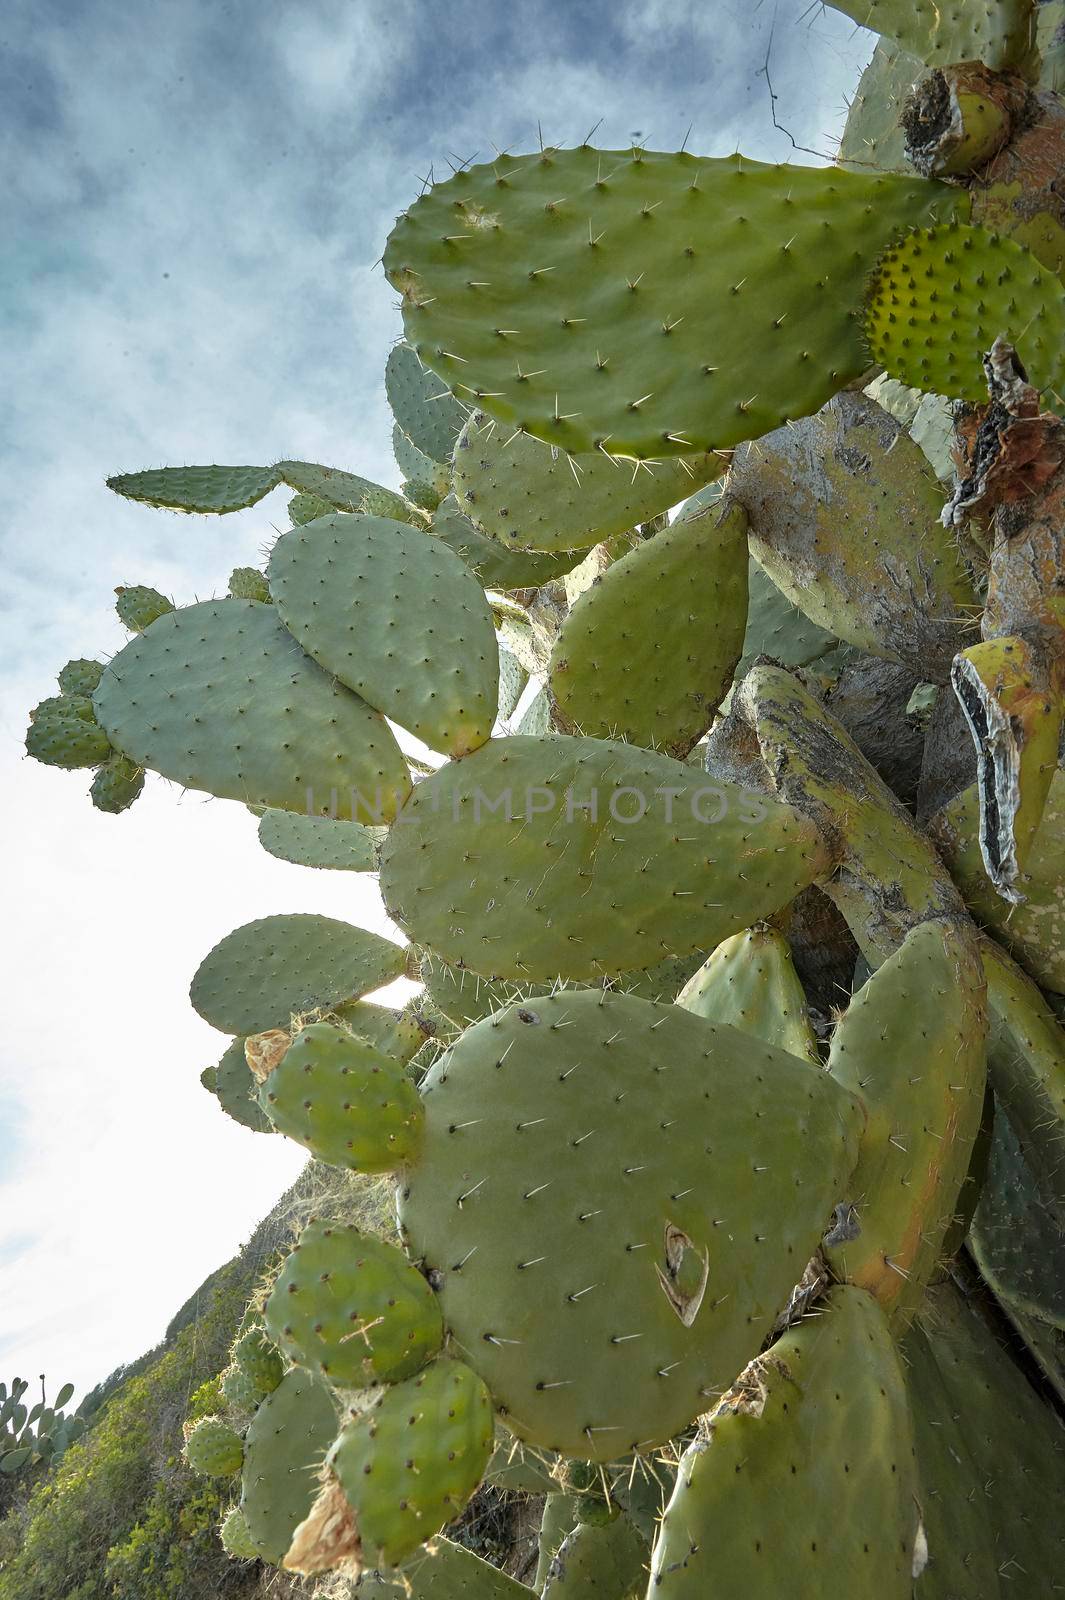 Detail of a plant of a prickly pear in wide-angle shot with clearly visible thorns and details of the leaves.